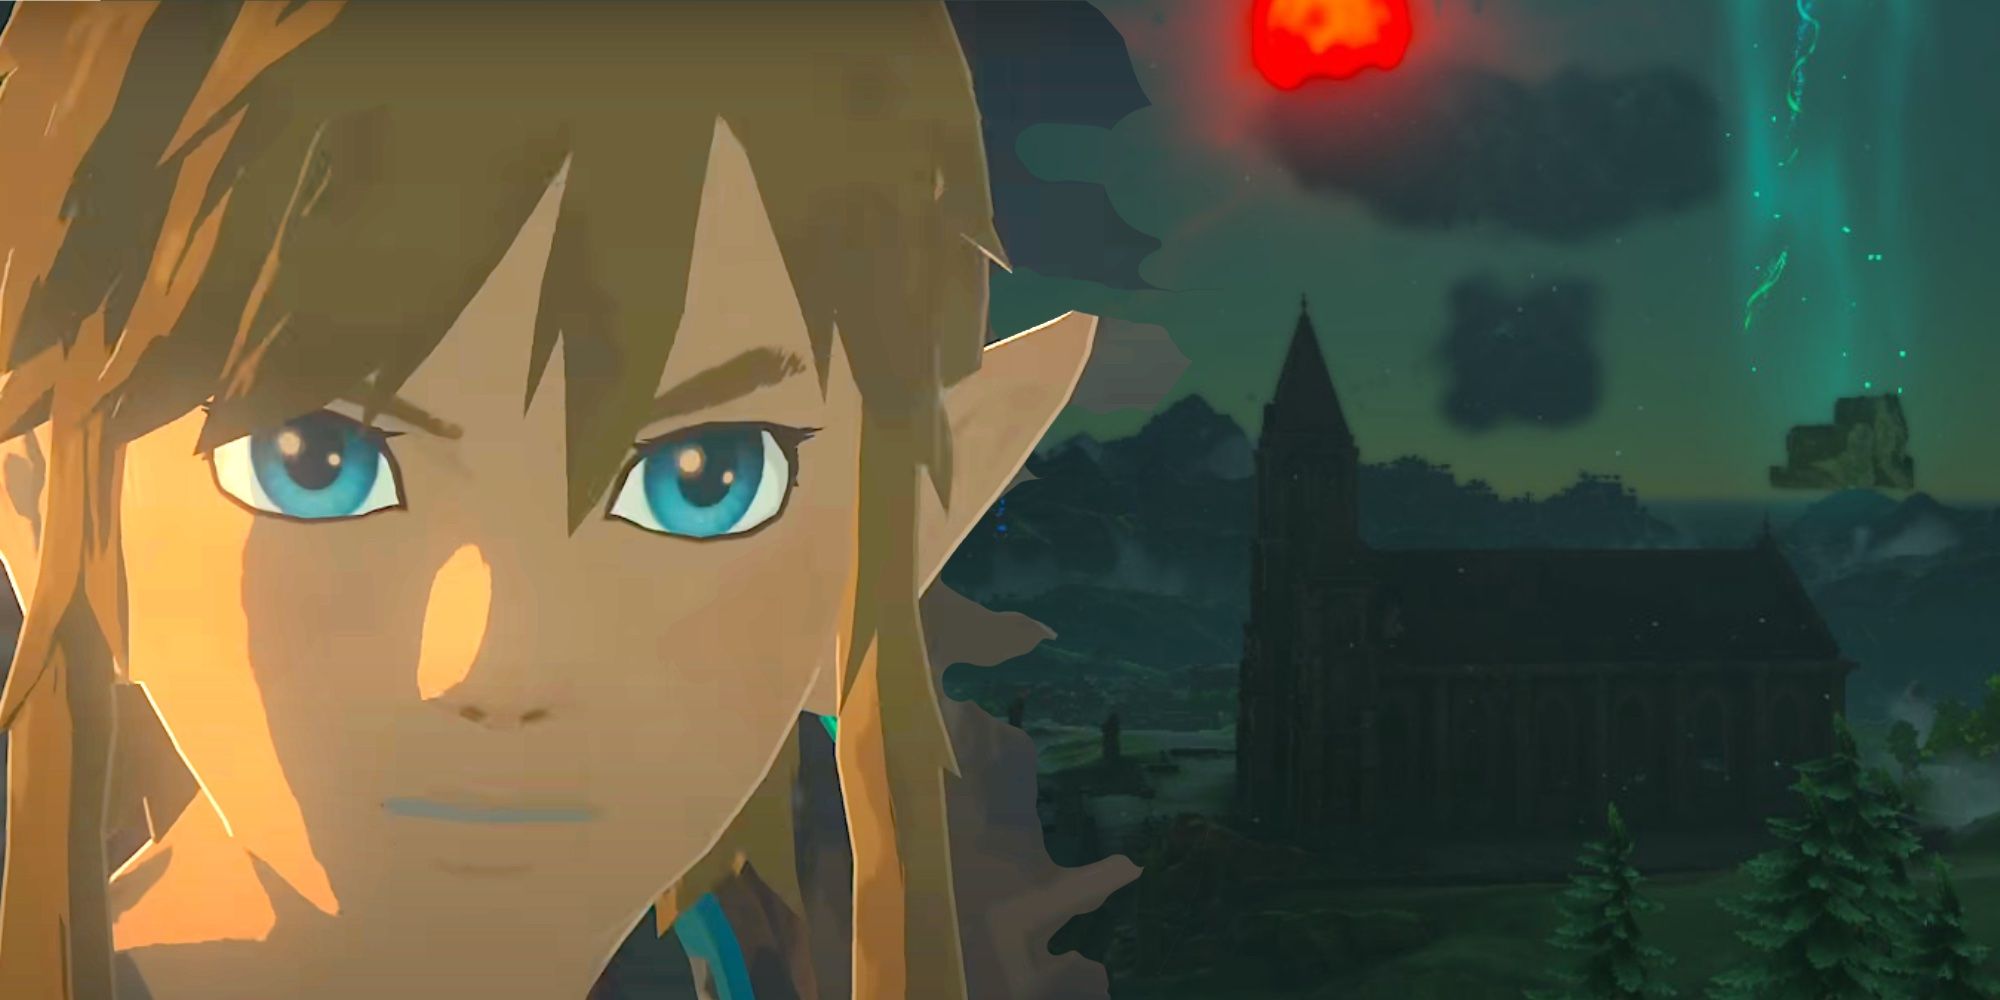 Everything The Legend of Zelda: Breath of the Wild 2 is hiding